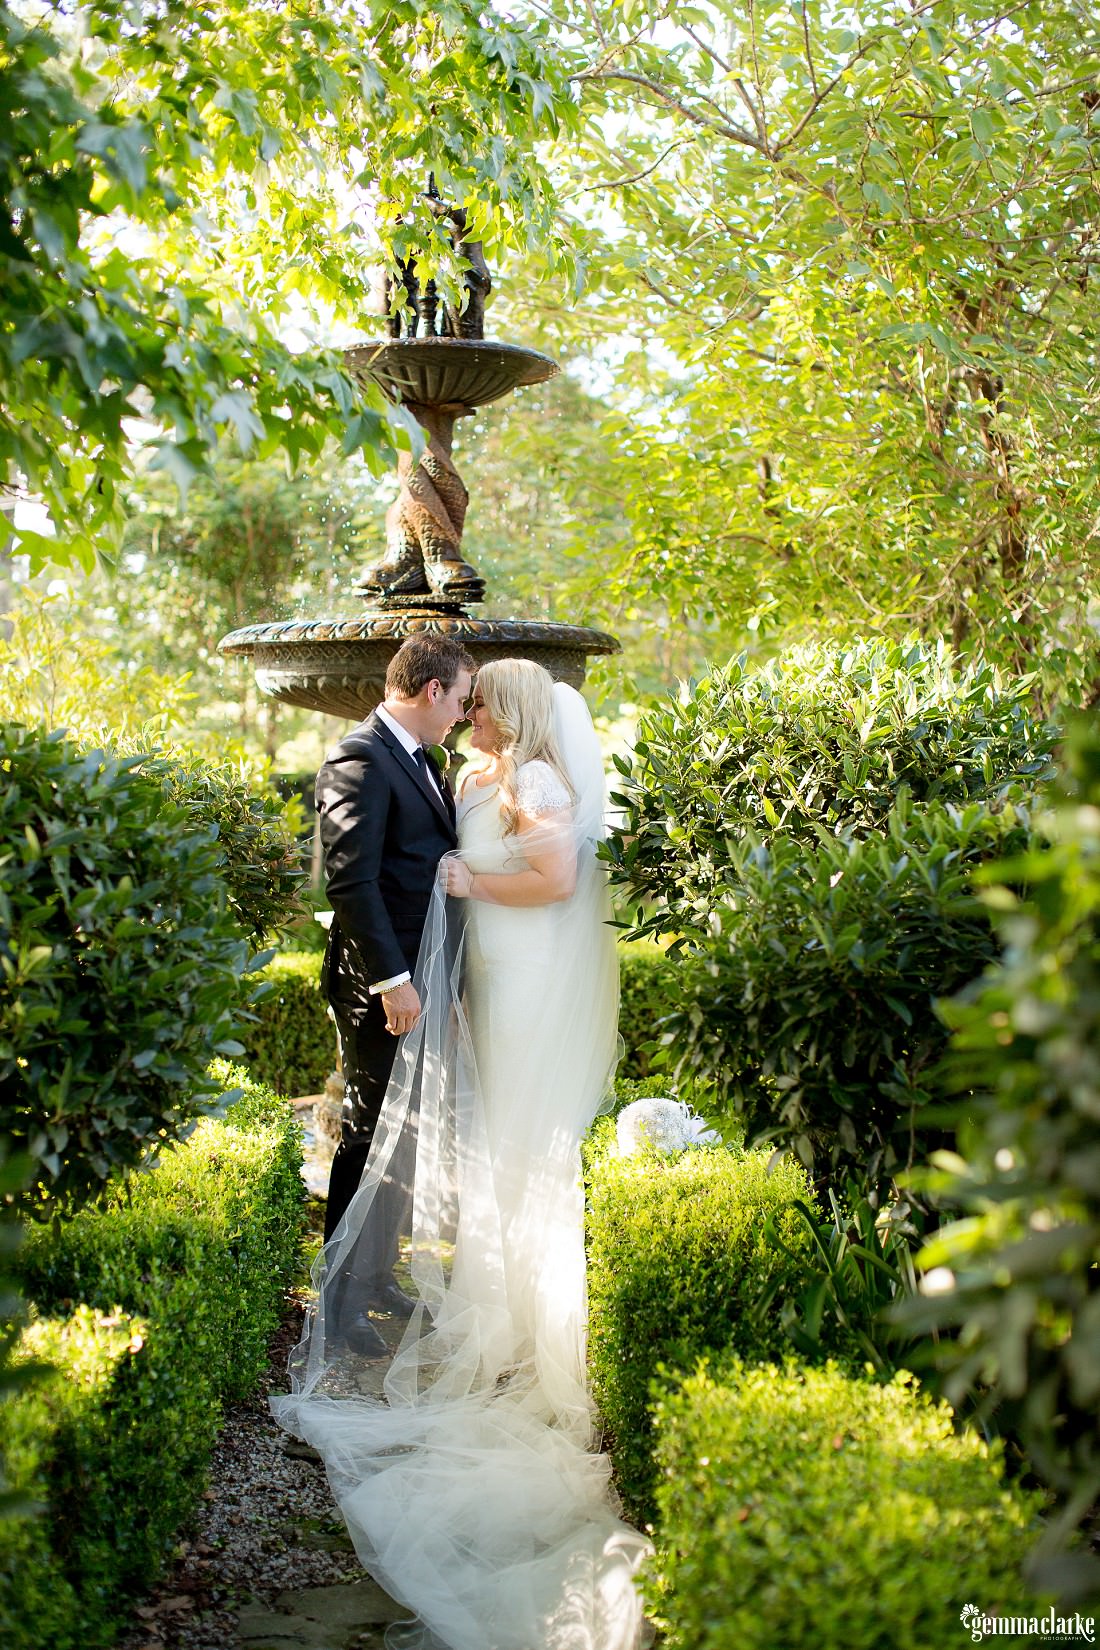 A bride and groom share an intimate moment in front of a fountain in a lush green garden - Echoes Hotel Wedding